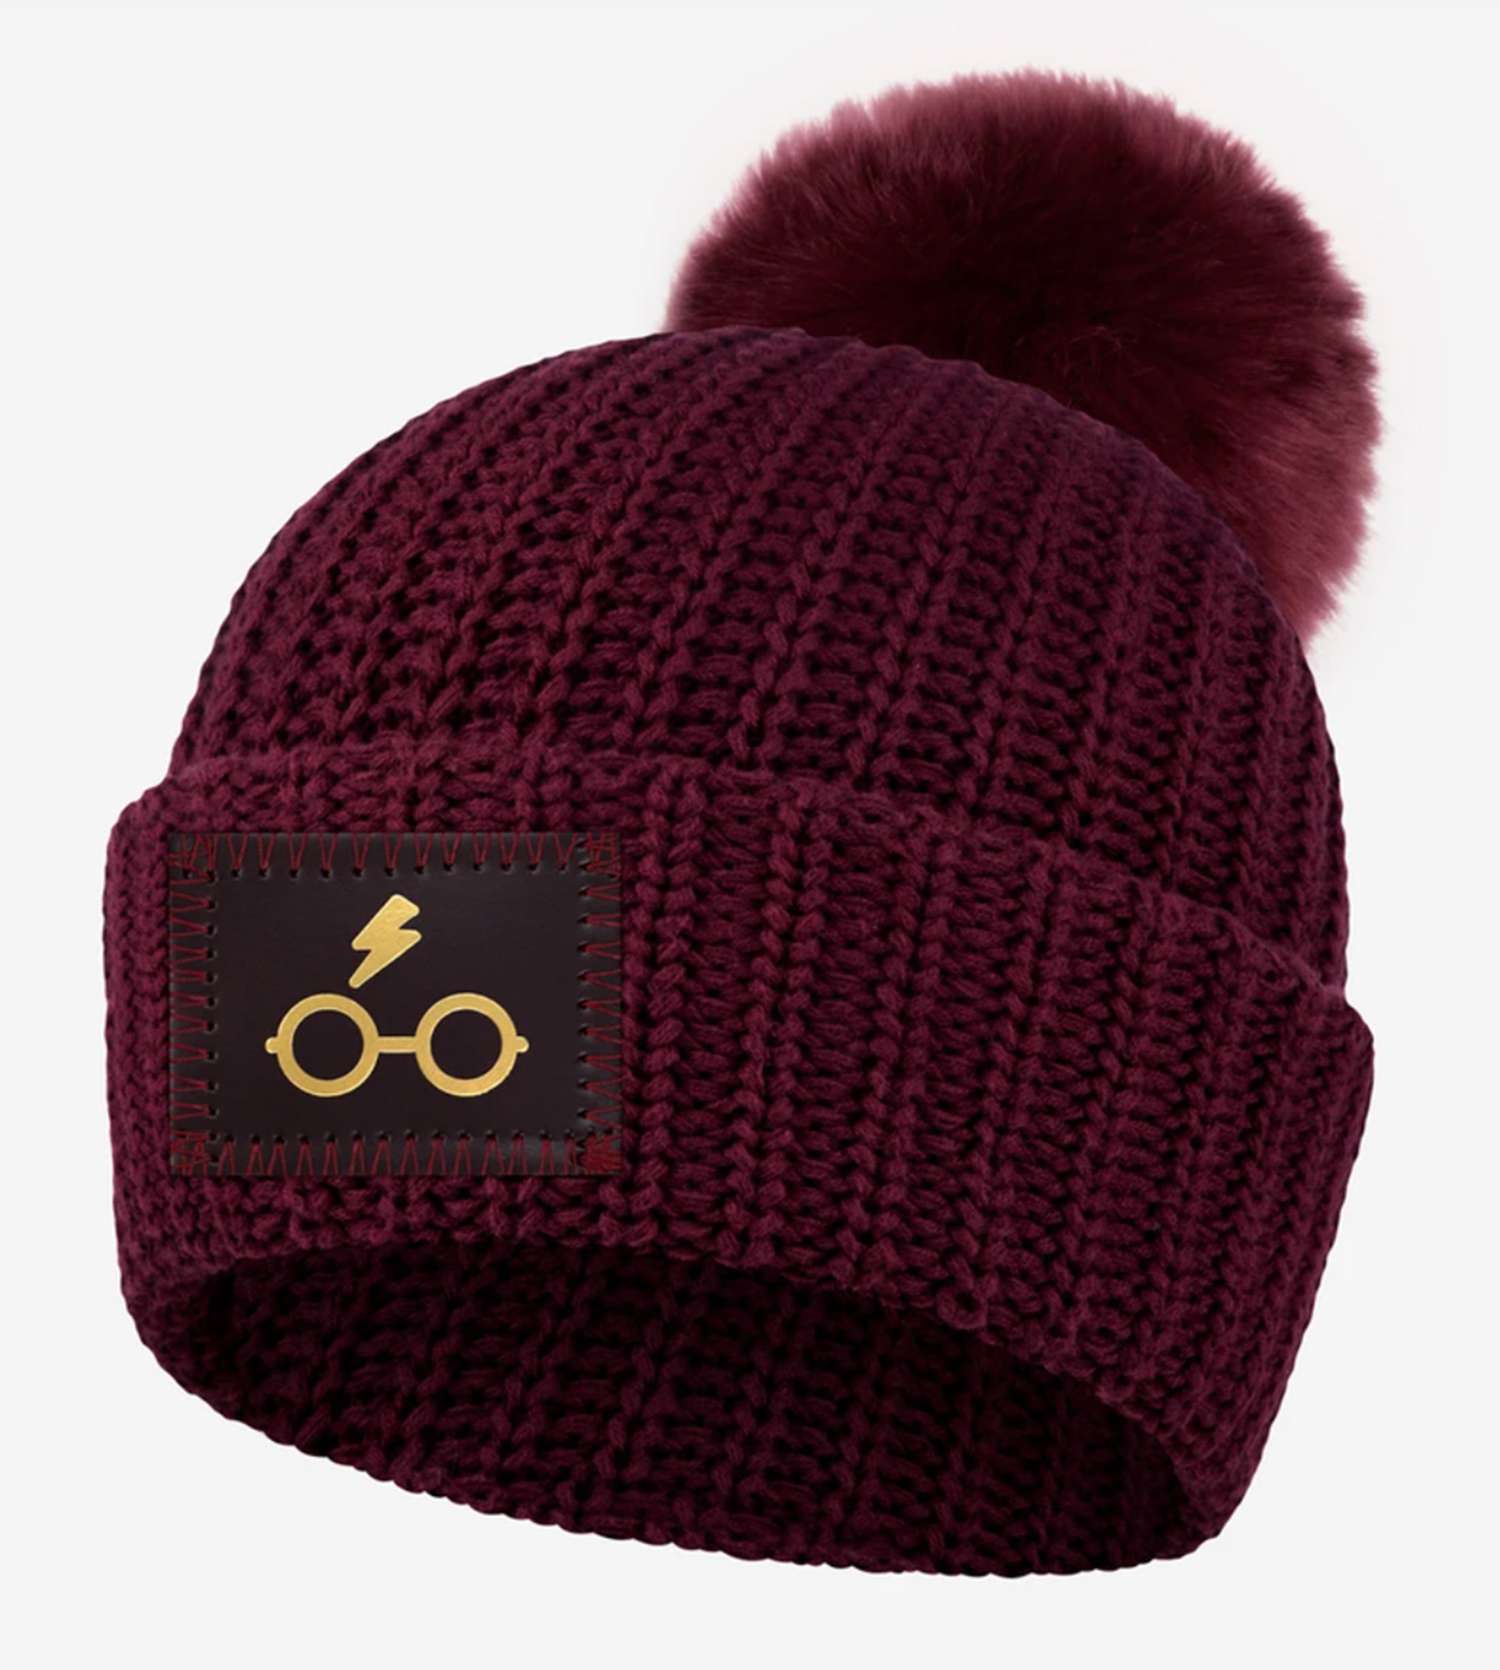 EW Harry Potter Holiday Gift Guide 2021